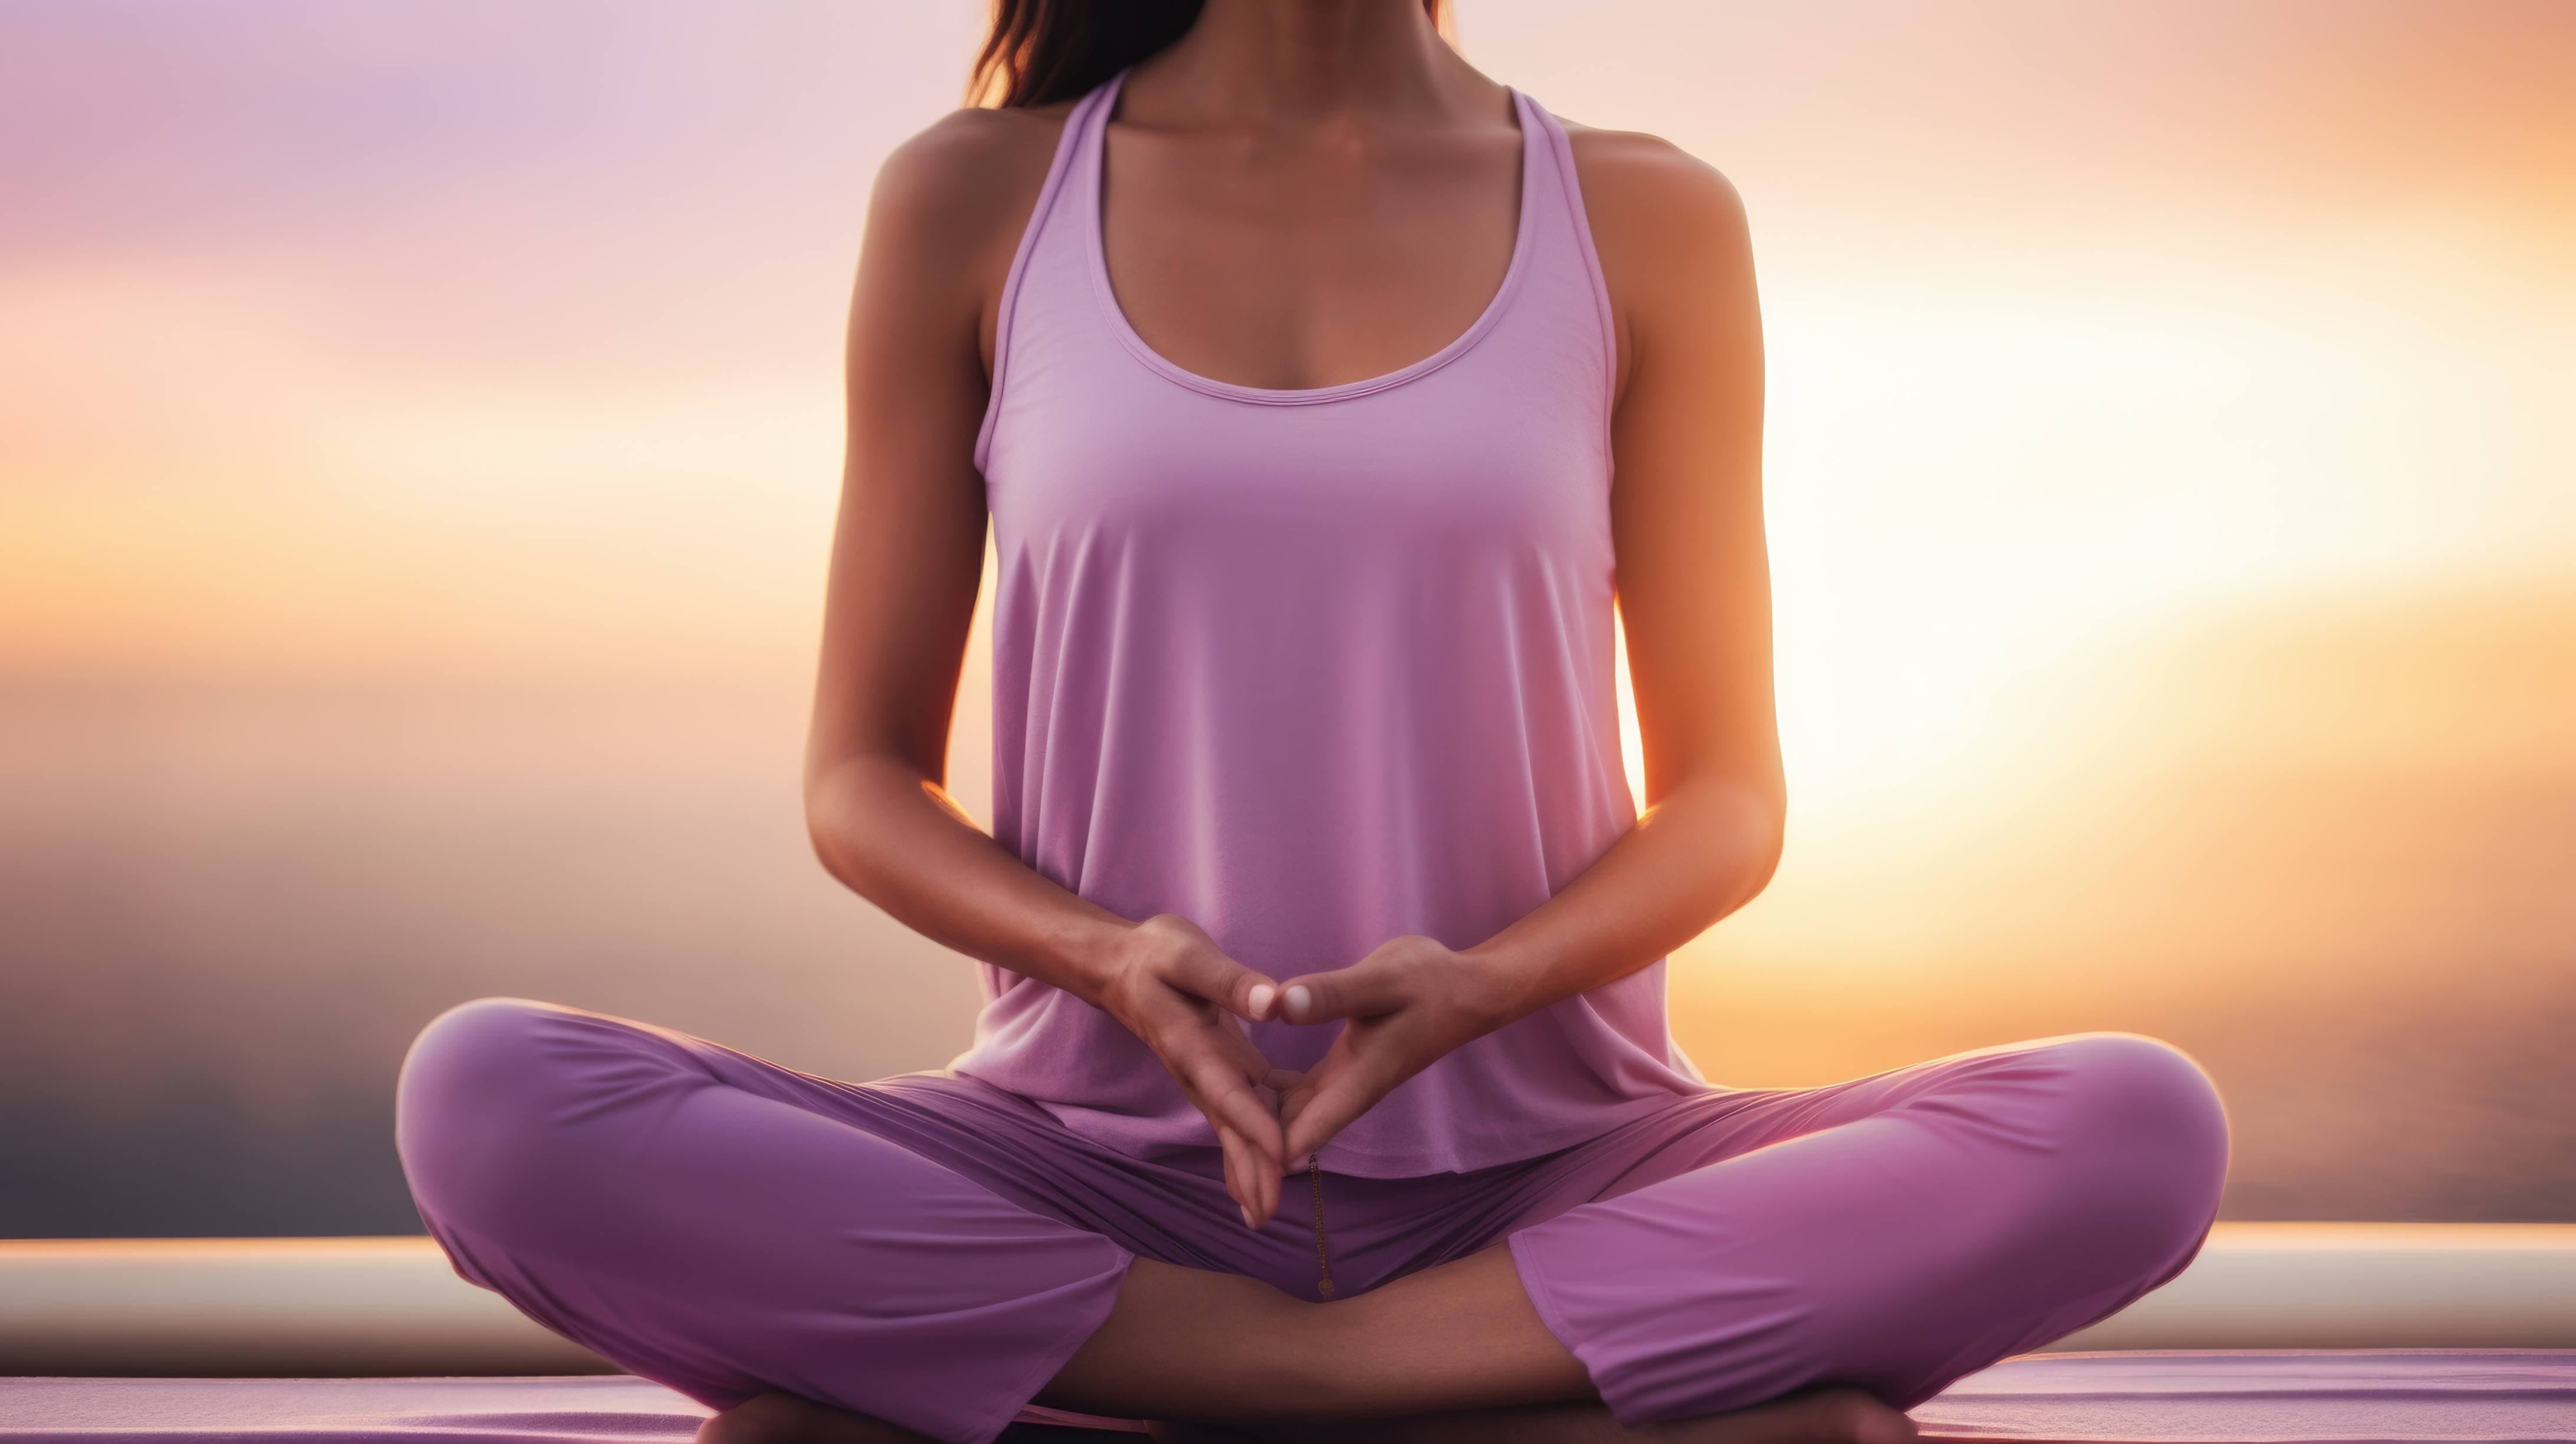 A serene image of a person meditating or practicing yoga.